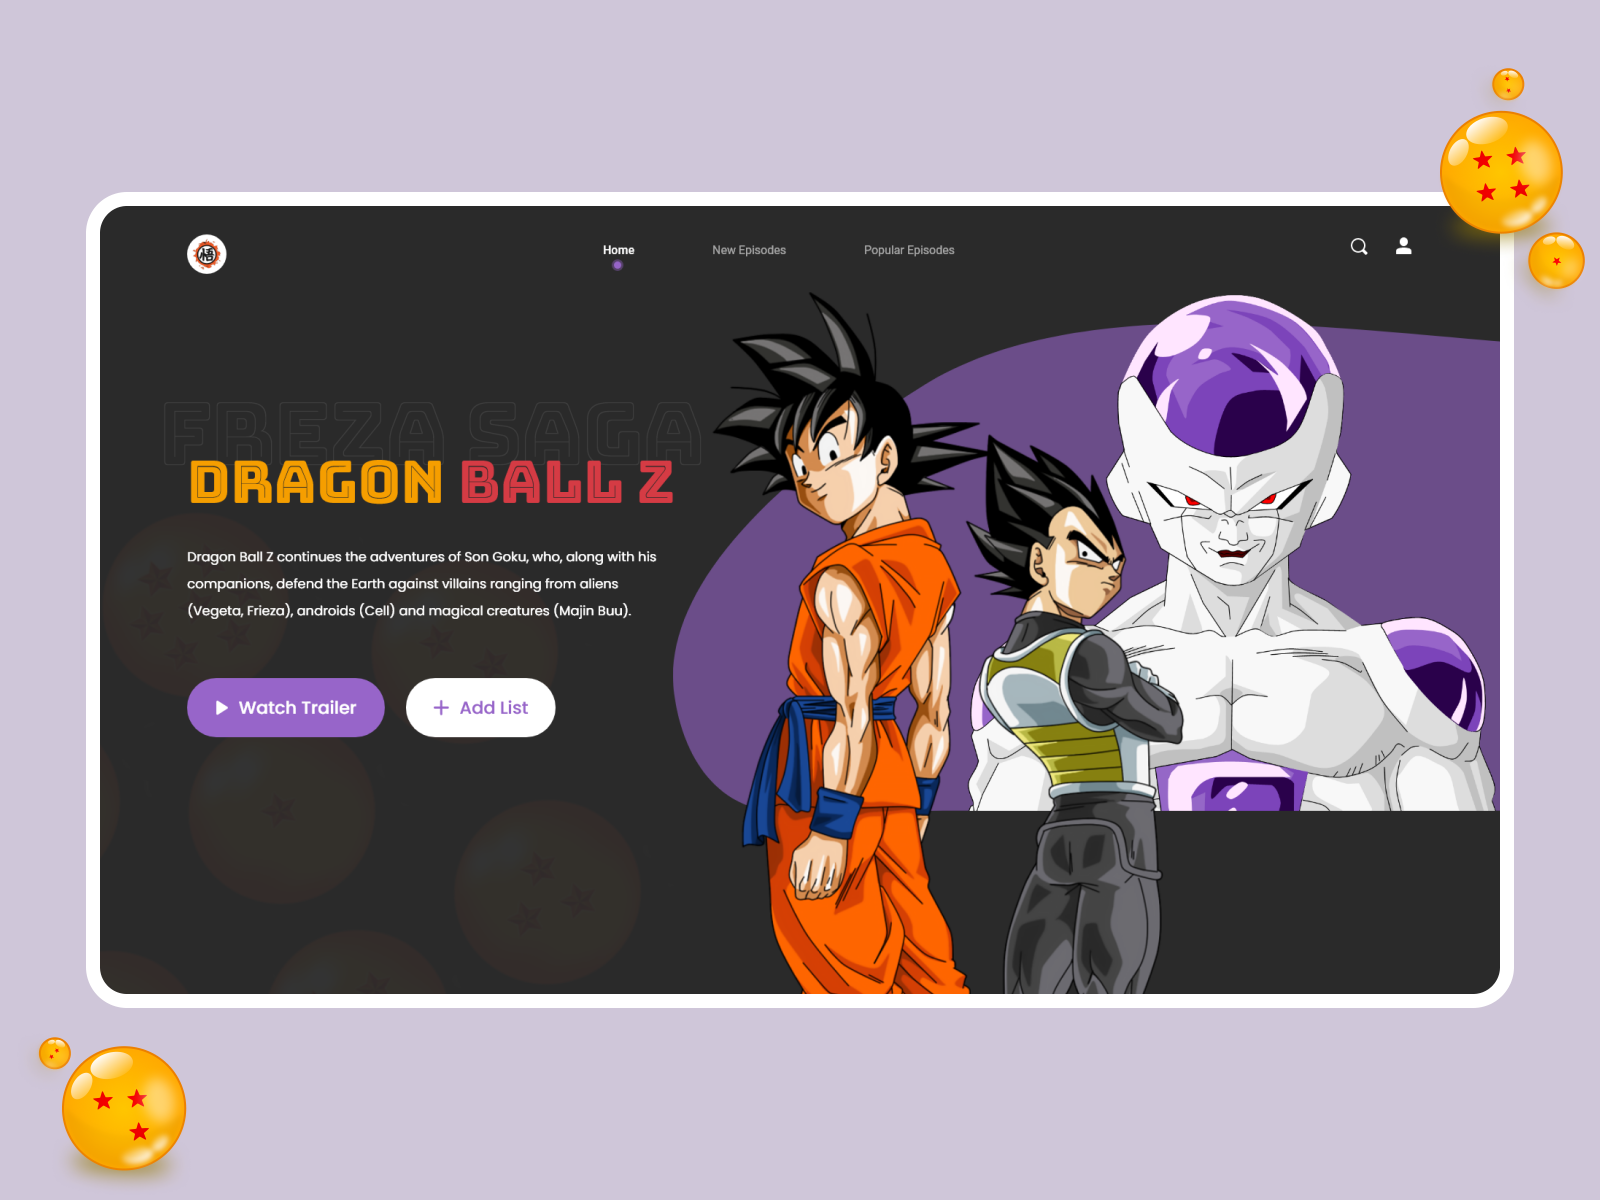 Dragon Ball Creator Details His New Androids' Design Process